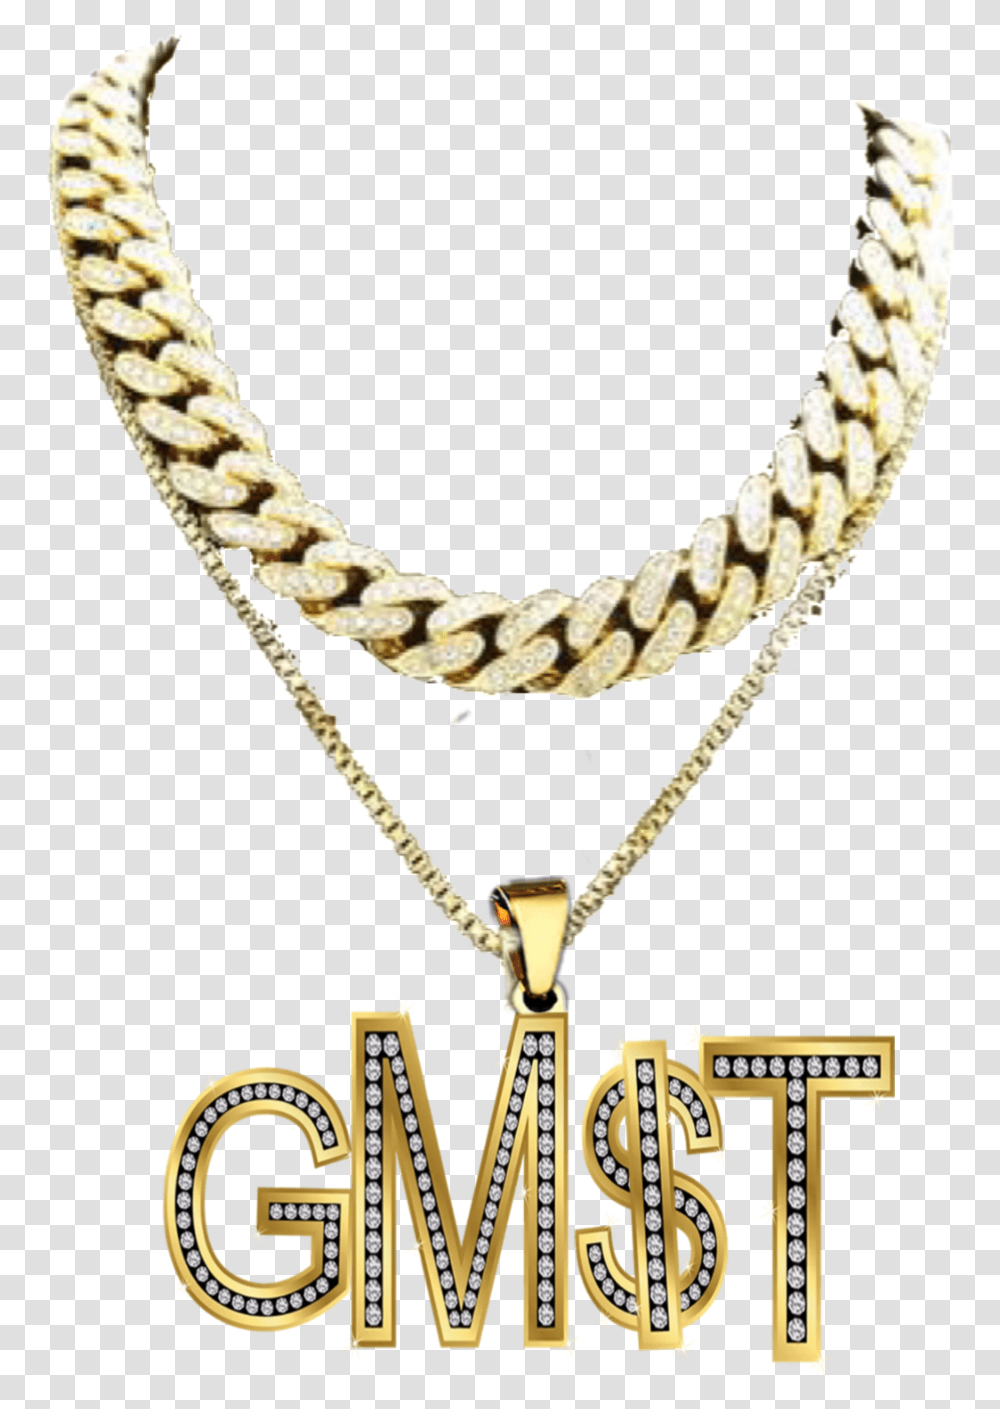 Jewerly Necklace Chain Diamond Gold Rapper Gmst Rapper Chain, Pendant, Snake, Reptile, Animal Transparent Png